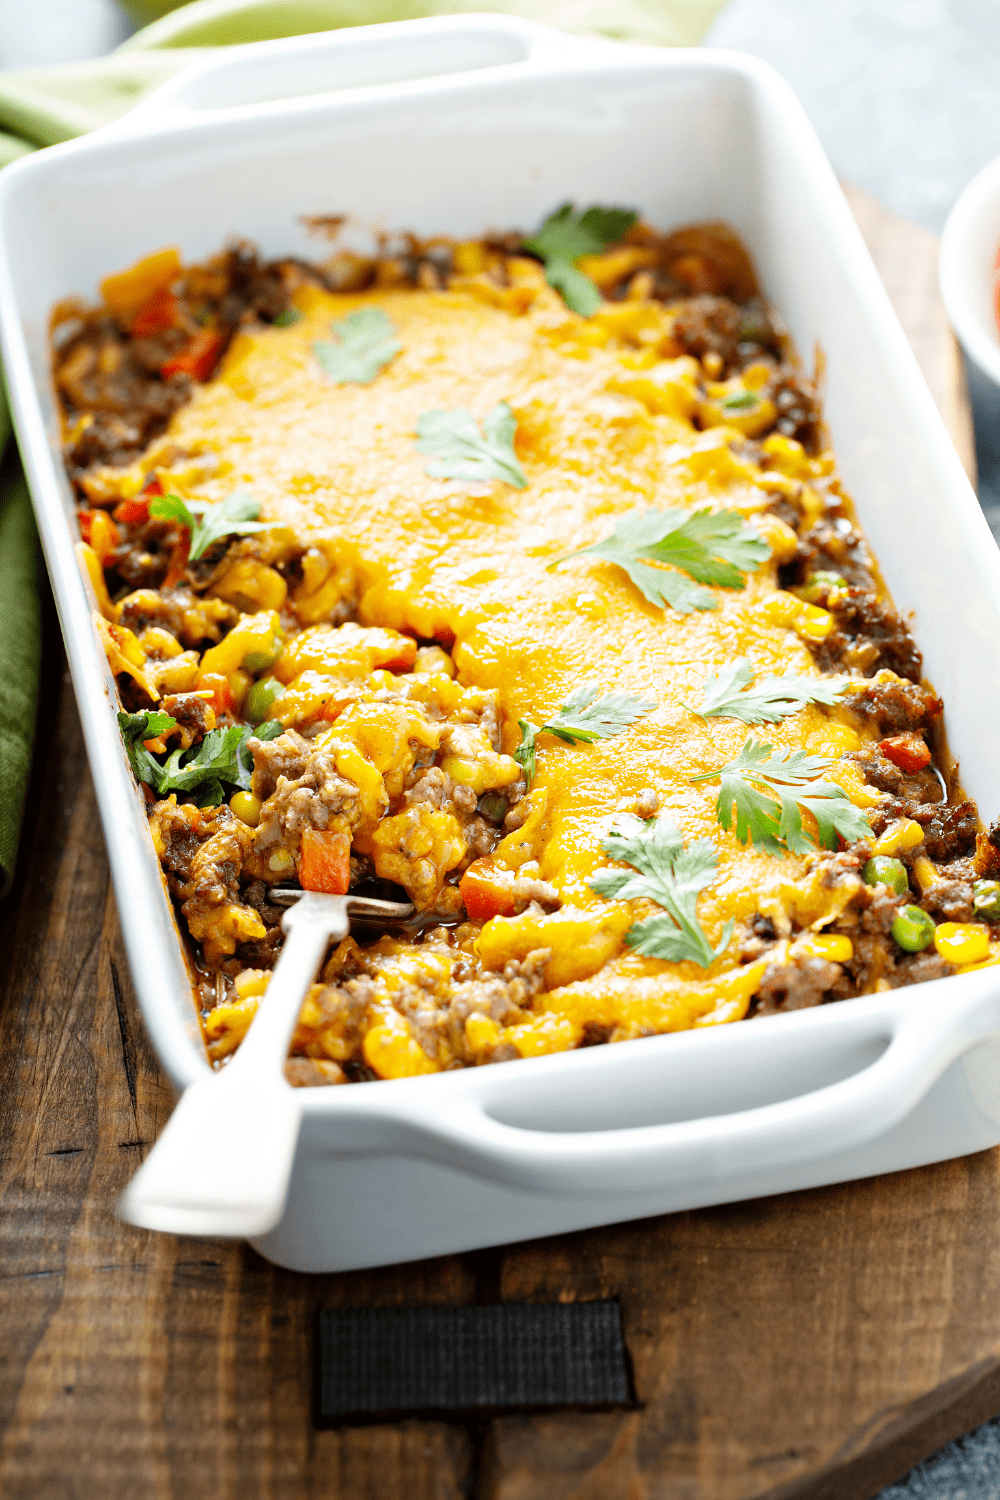 Ground beef casserole with corn and peas with melted cheese on top.